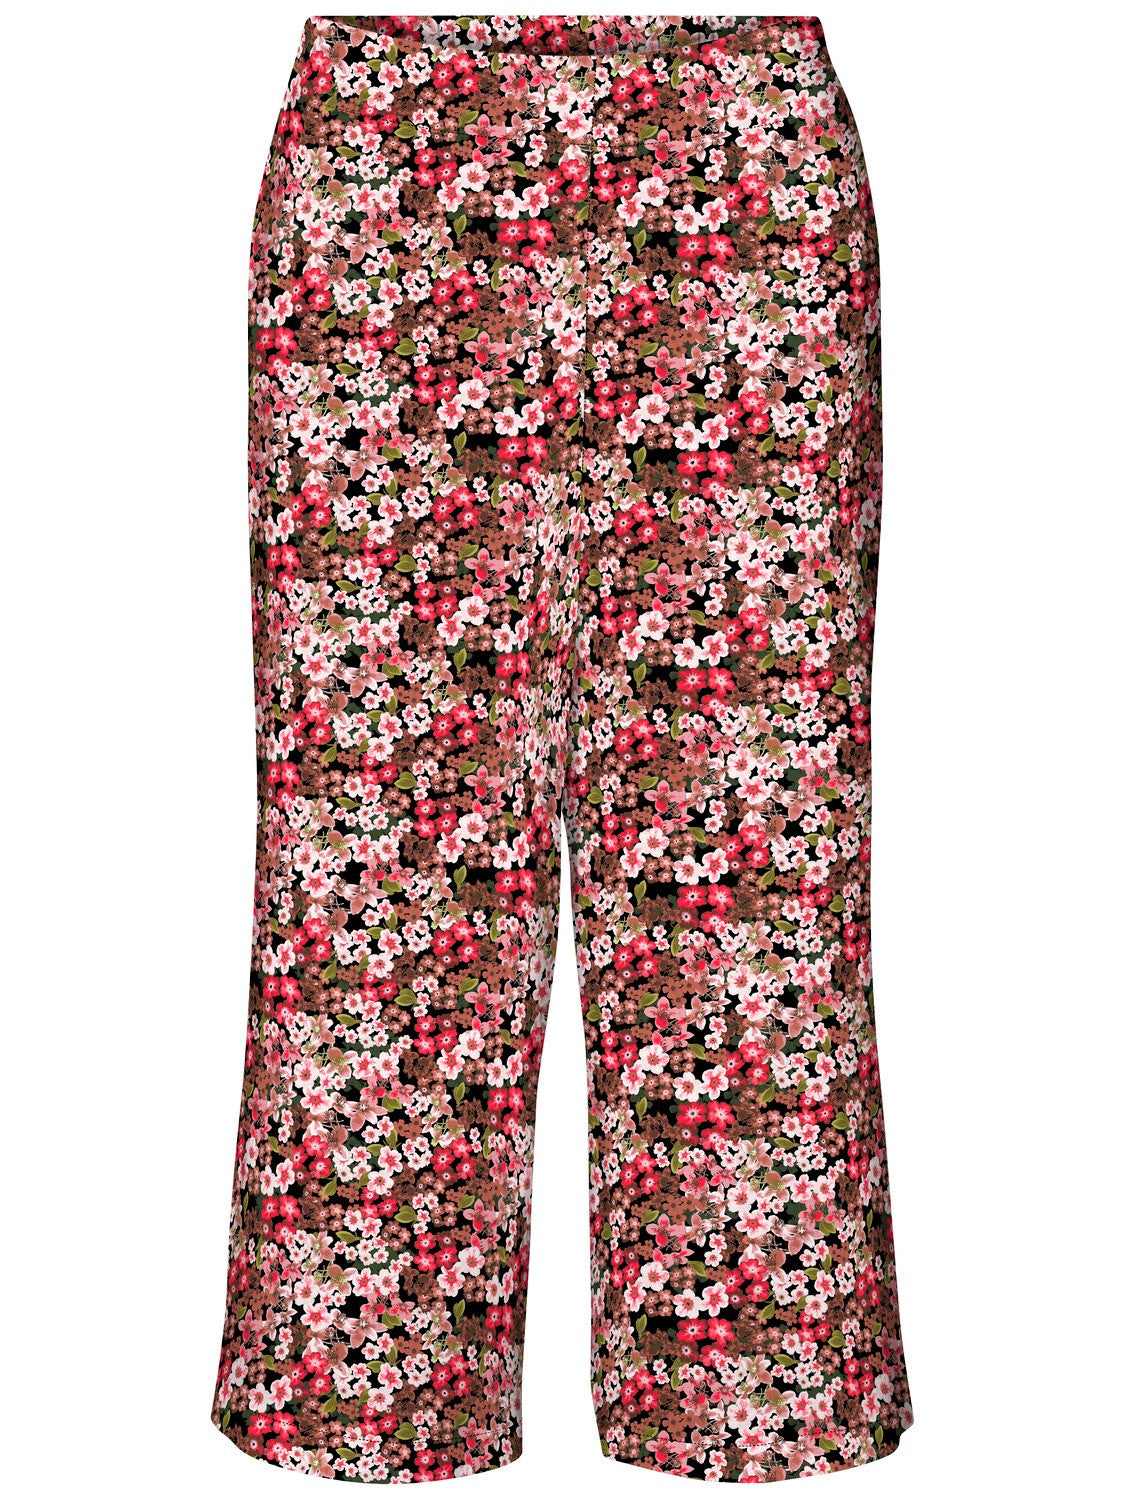 Vero Moda Pattern Culotte Pant in Red Floral - XS